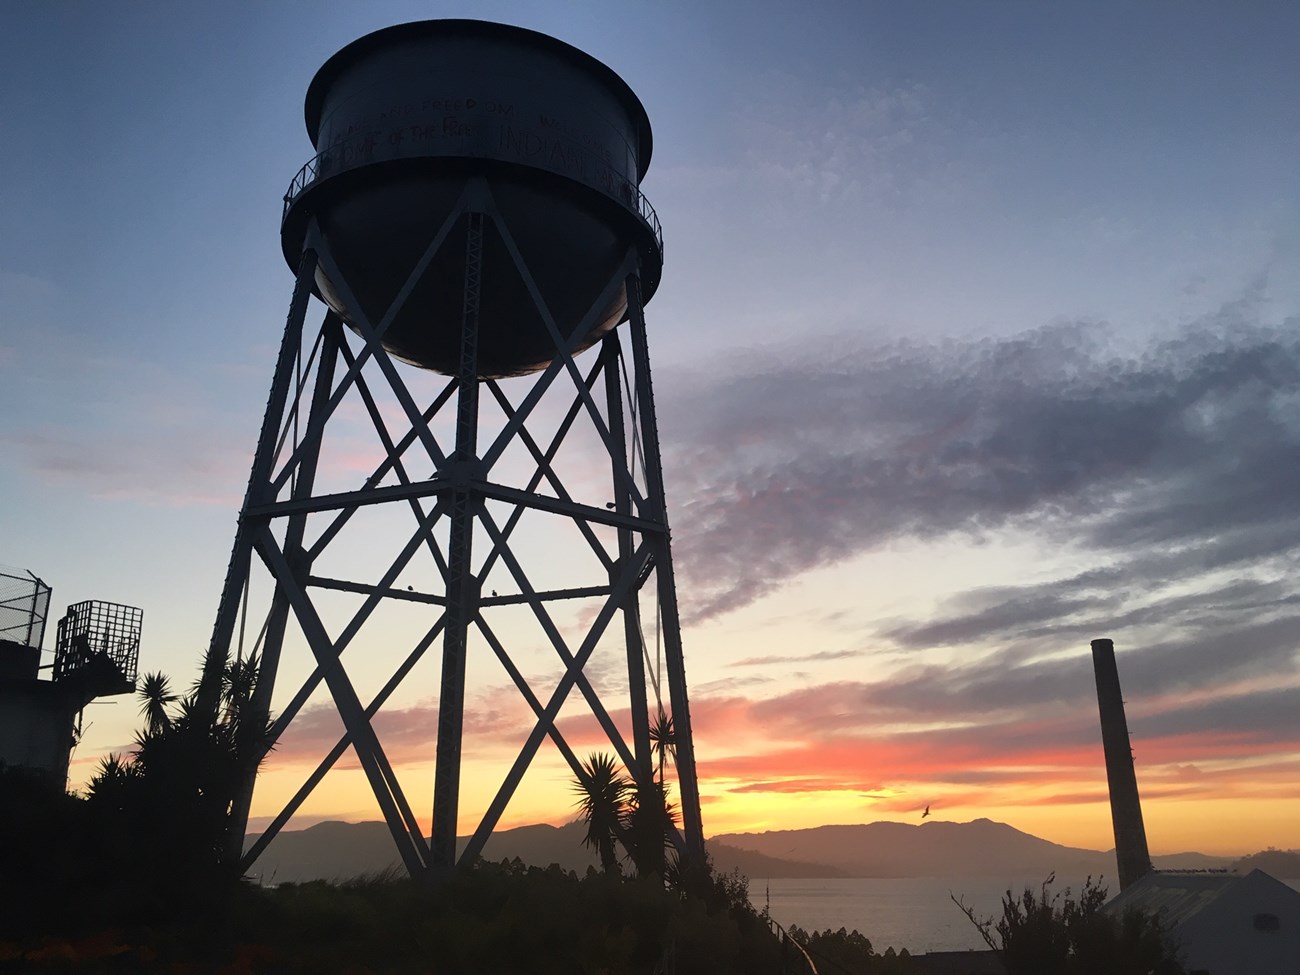 The Alcatraz water tower silhouetted against the sunset.